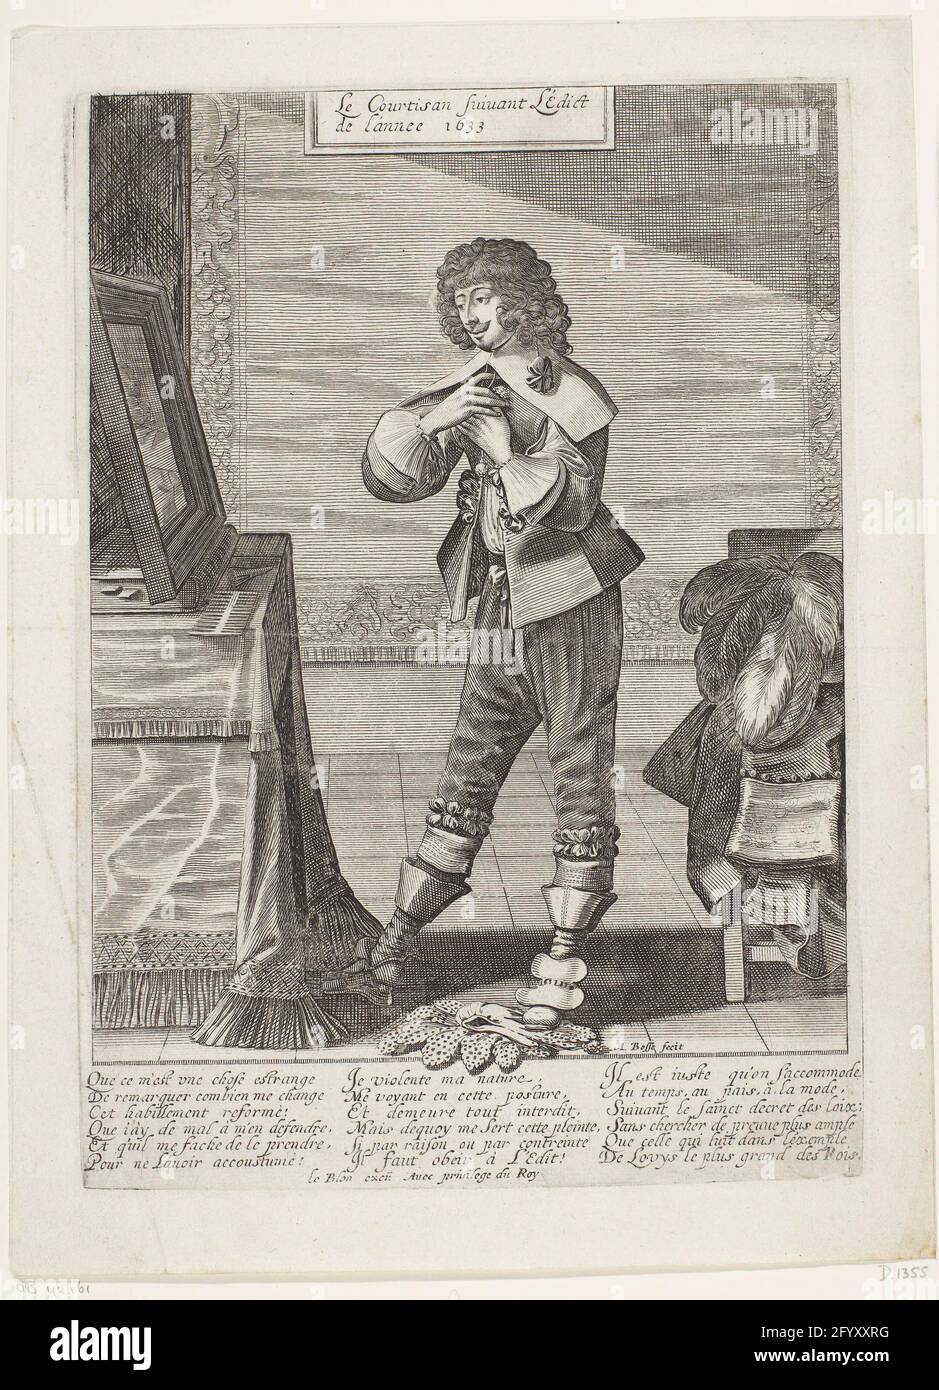 French Hoveling follows the edict of 1633; Le Courtisan Suivant l'édict de l'Annee 1633; Following the edict of 1633. This Hoveling is dressed according to the prescribed rules of the 1633 edict. He is wearing a simple smooth collar, while holding a foot on his fashionable (prohibited) sides collar. In the margin a caption in French to which the man does not feel comfortable in this clothing, but obedient to the king of France. Stock Photo